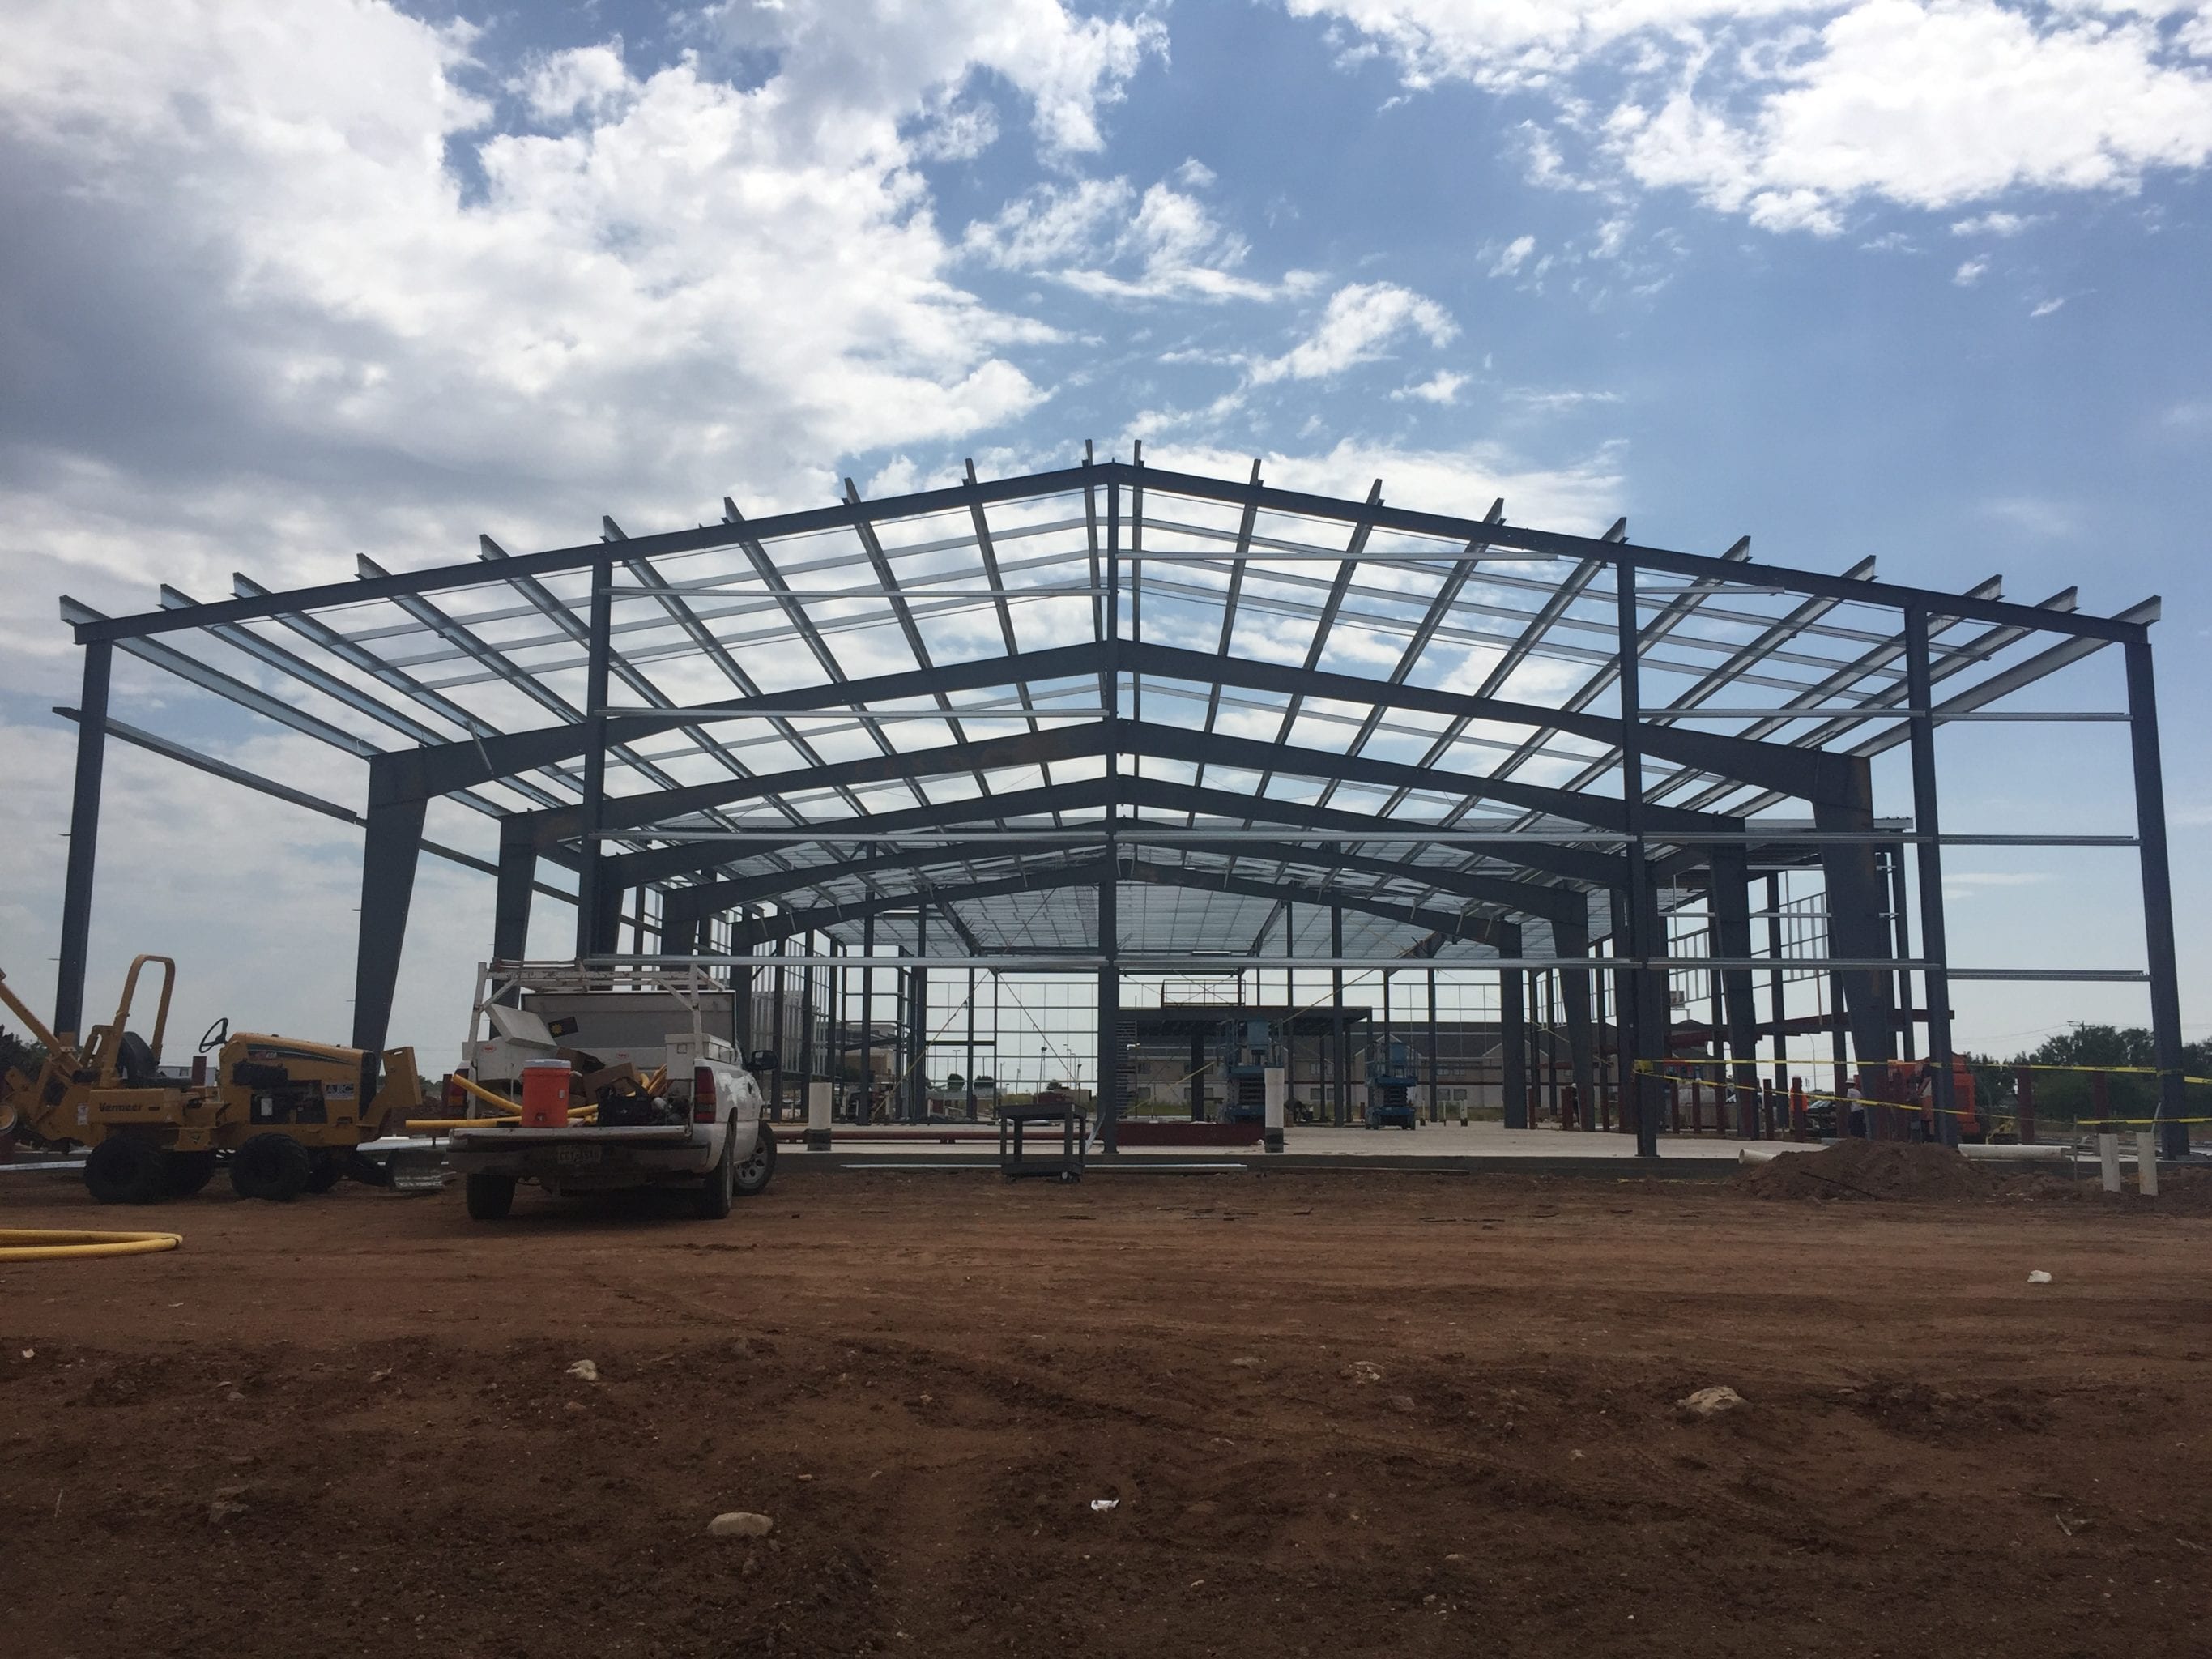 metal building supply and erection services: Commercial Building Contractor in West Texas - RHS Construction Services